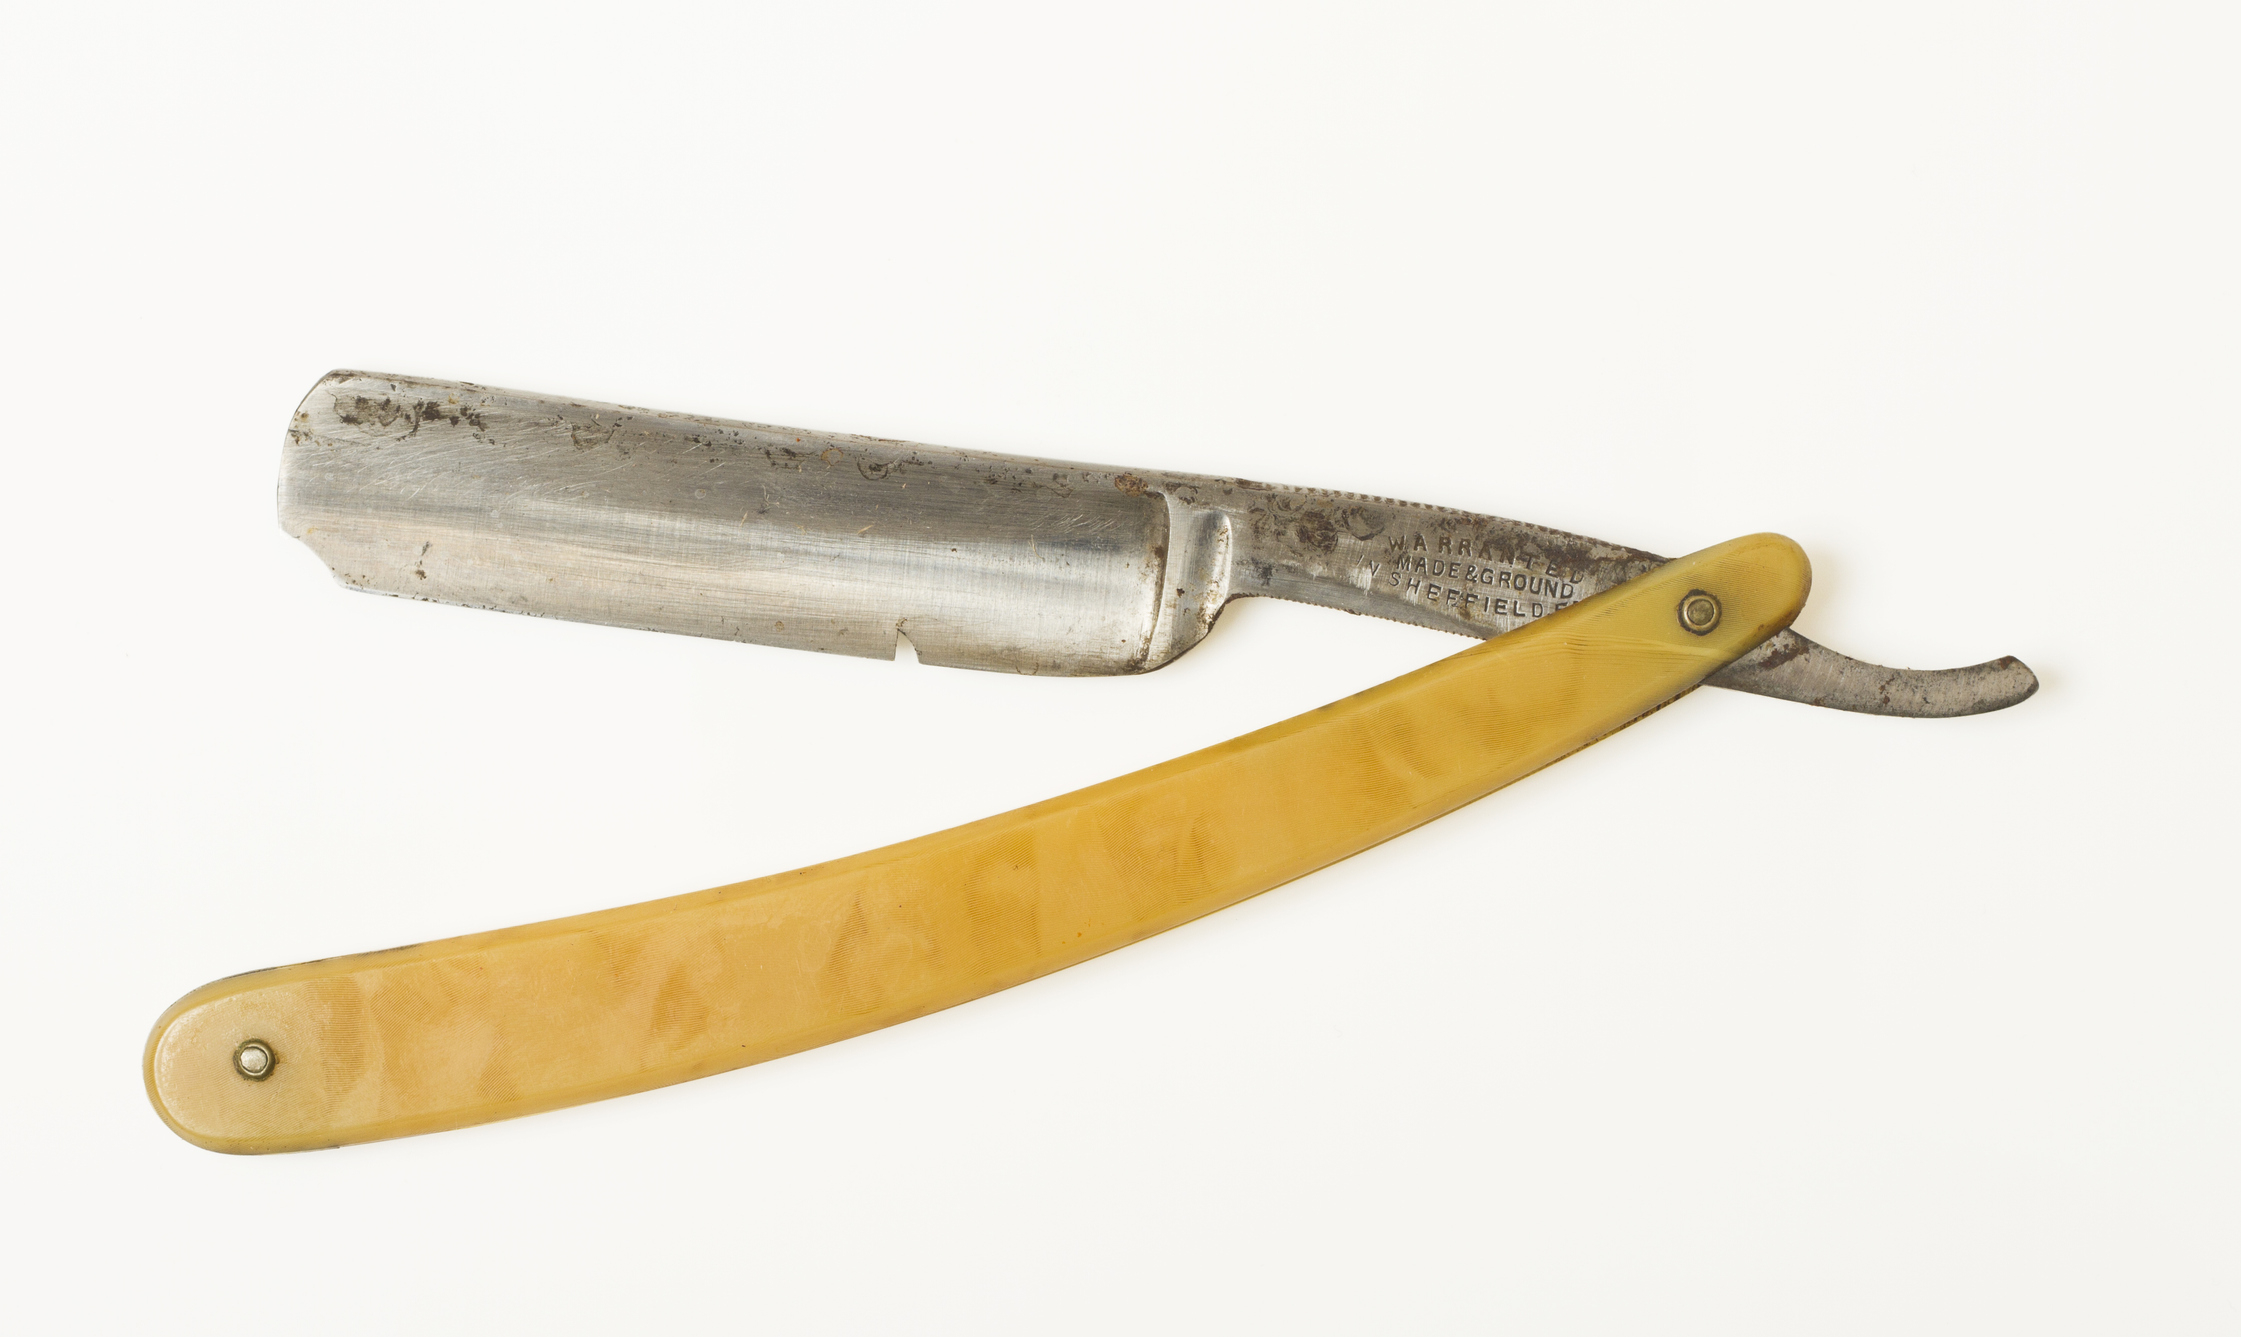 Vintage straight razor with ivory-colored handle on a plain background